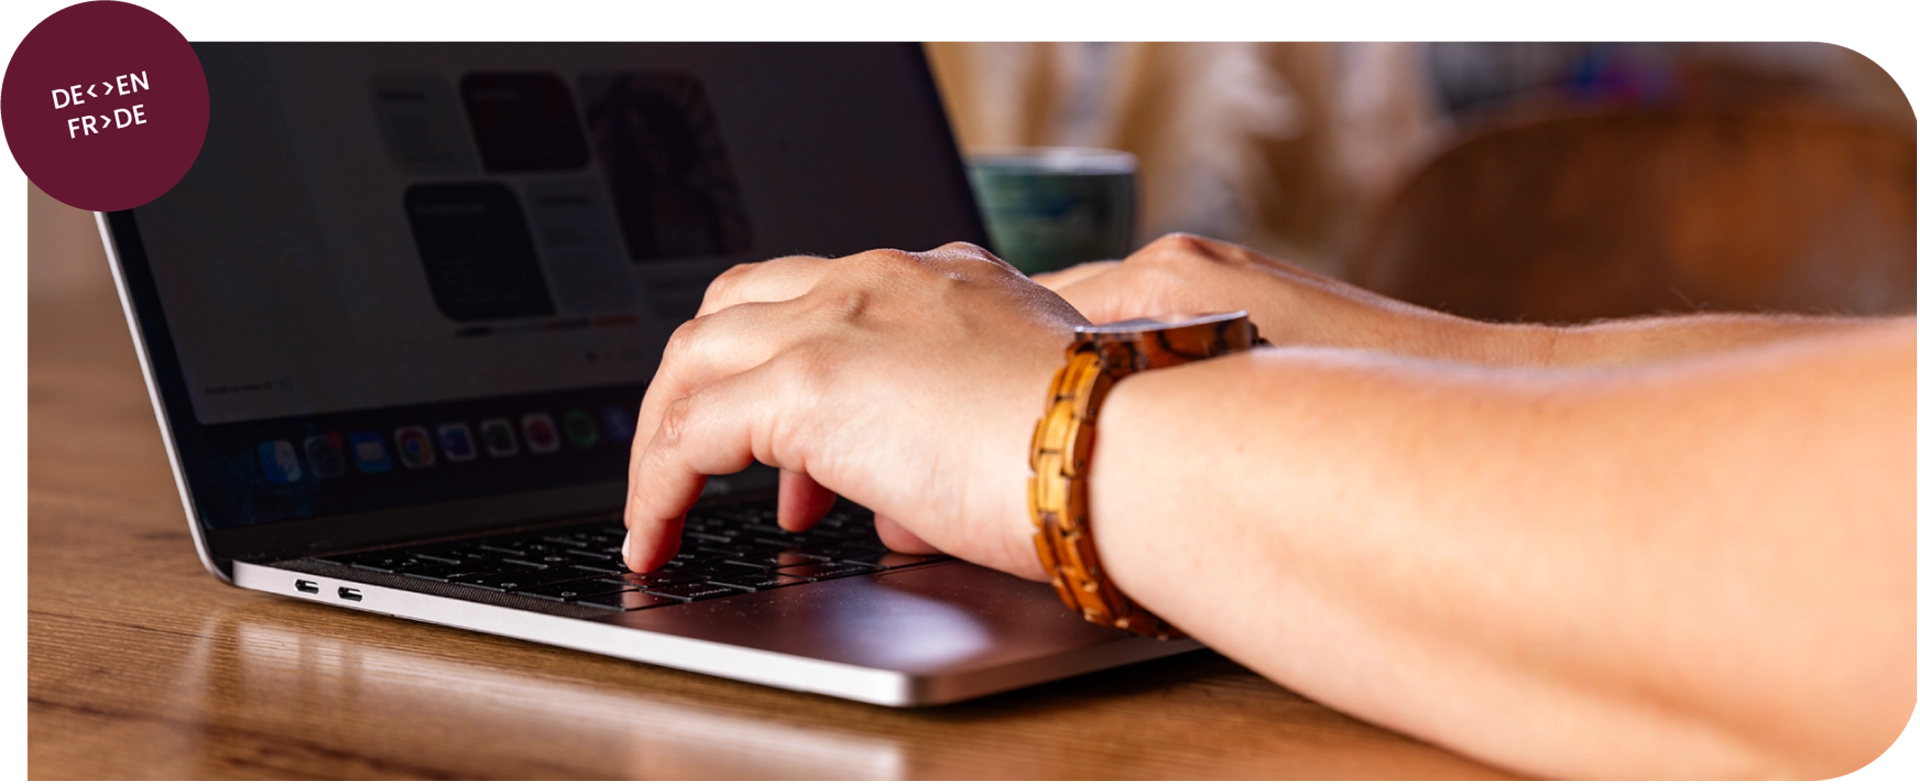 Image showing a person's arms whily typing something on a laptop.